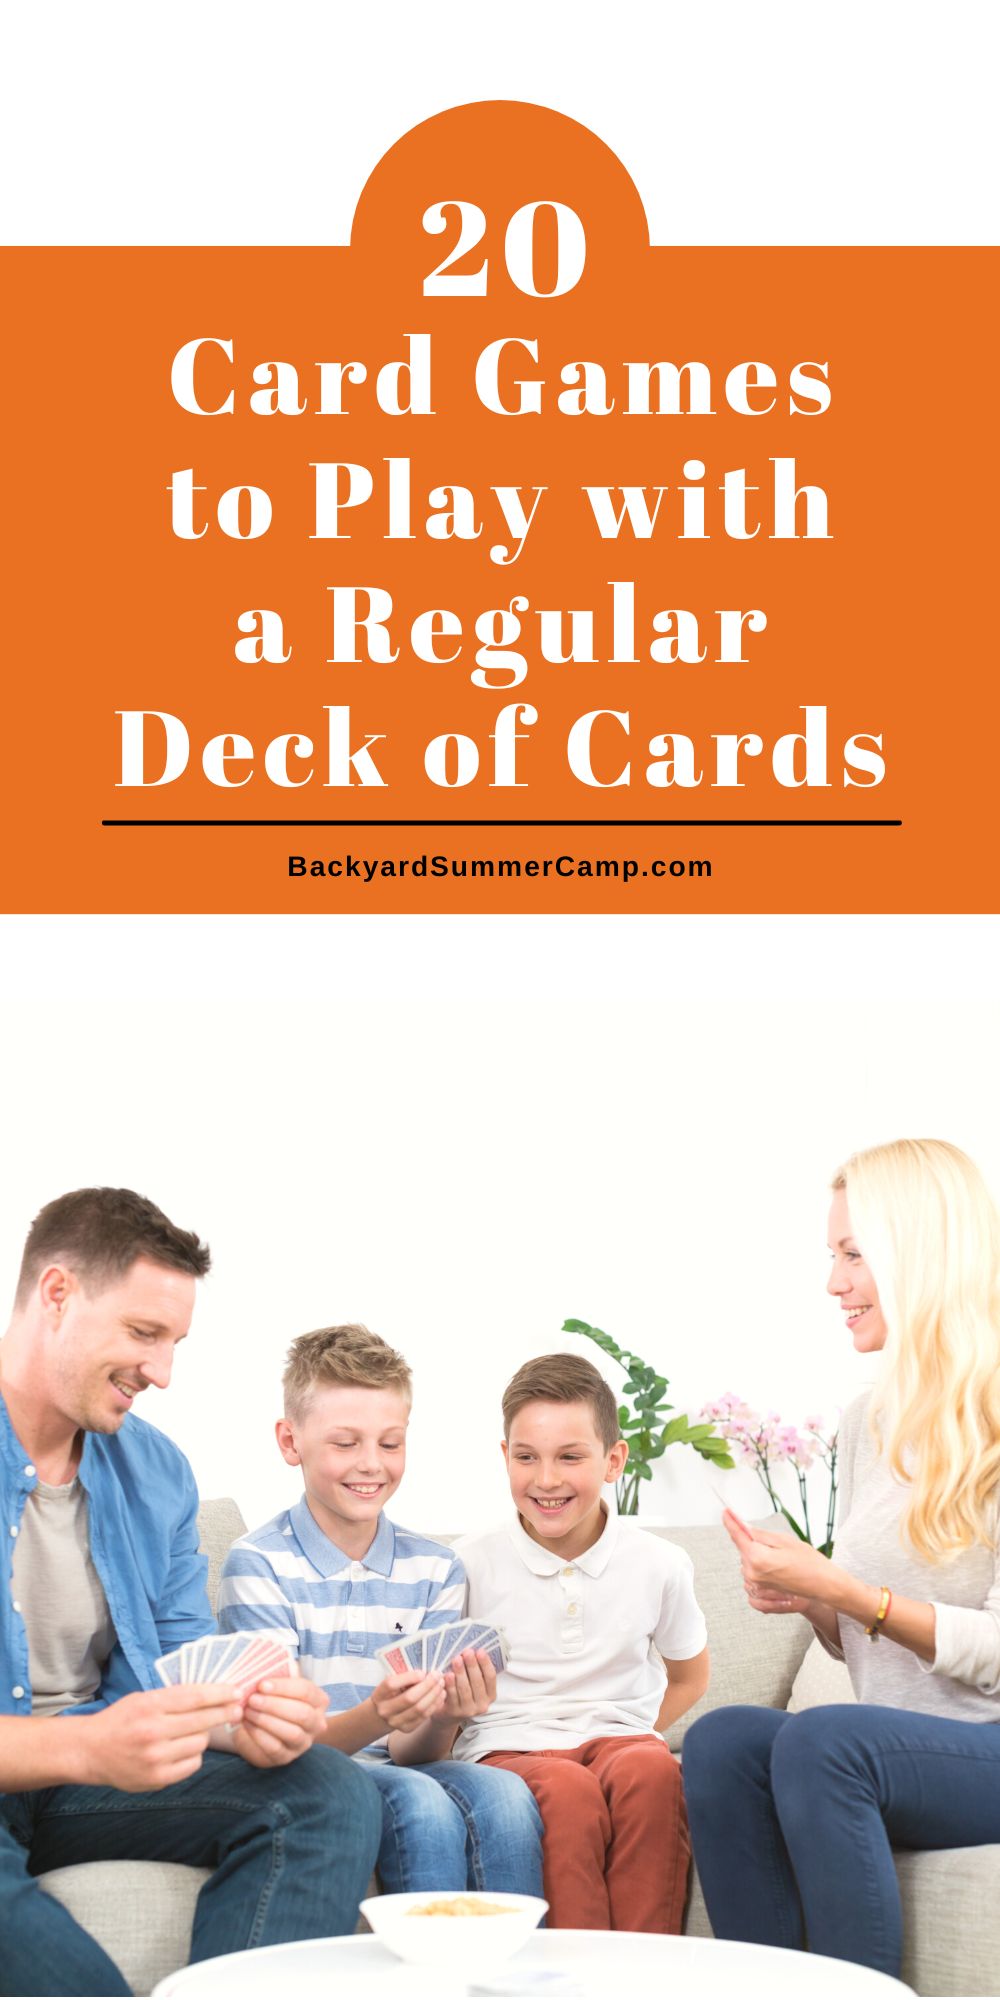 Family sitting on a couch around a coffee table holding playing cards with text overlay that reads "20 card games to play with a regular deck of cards."